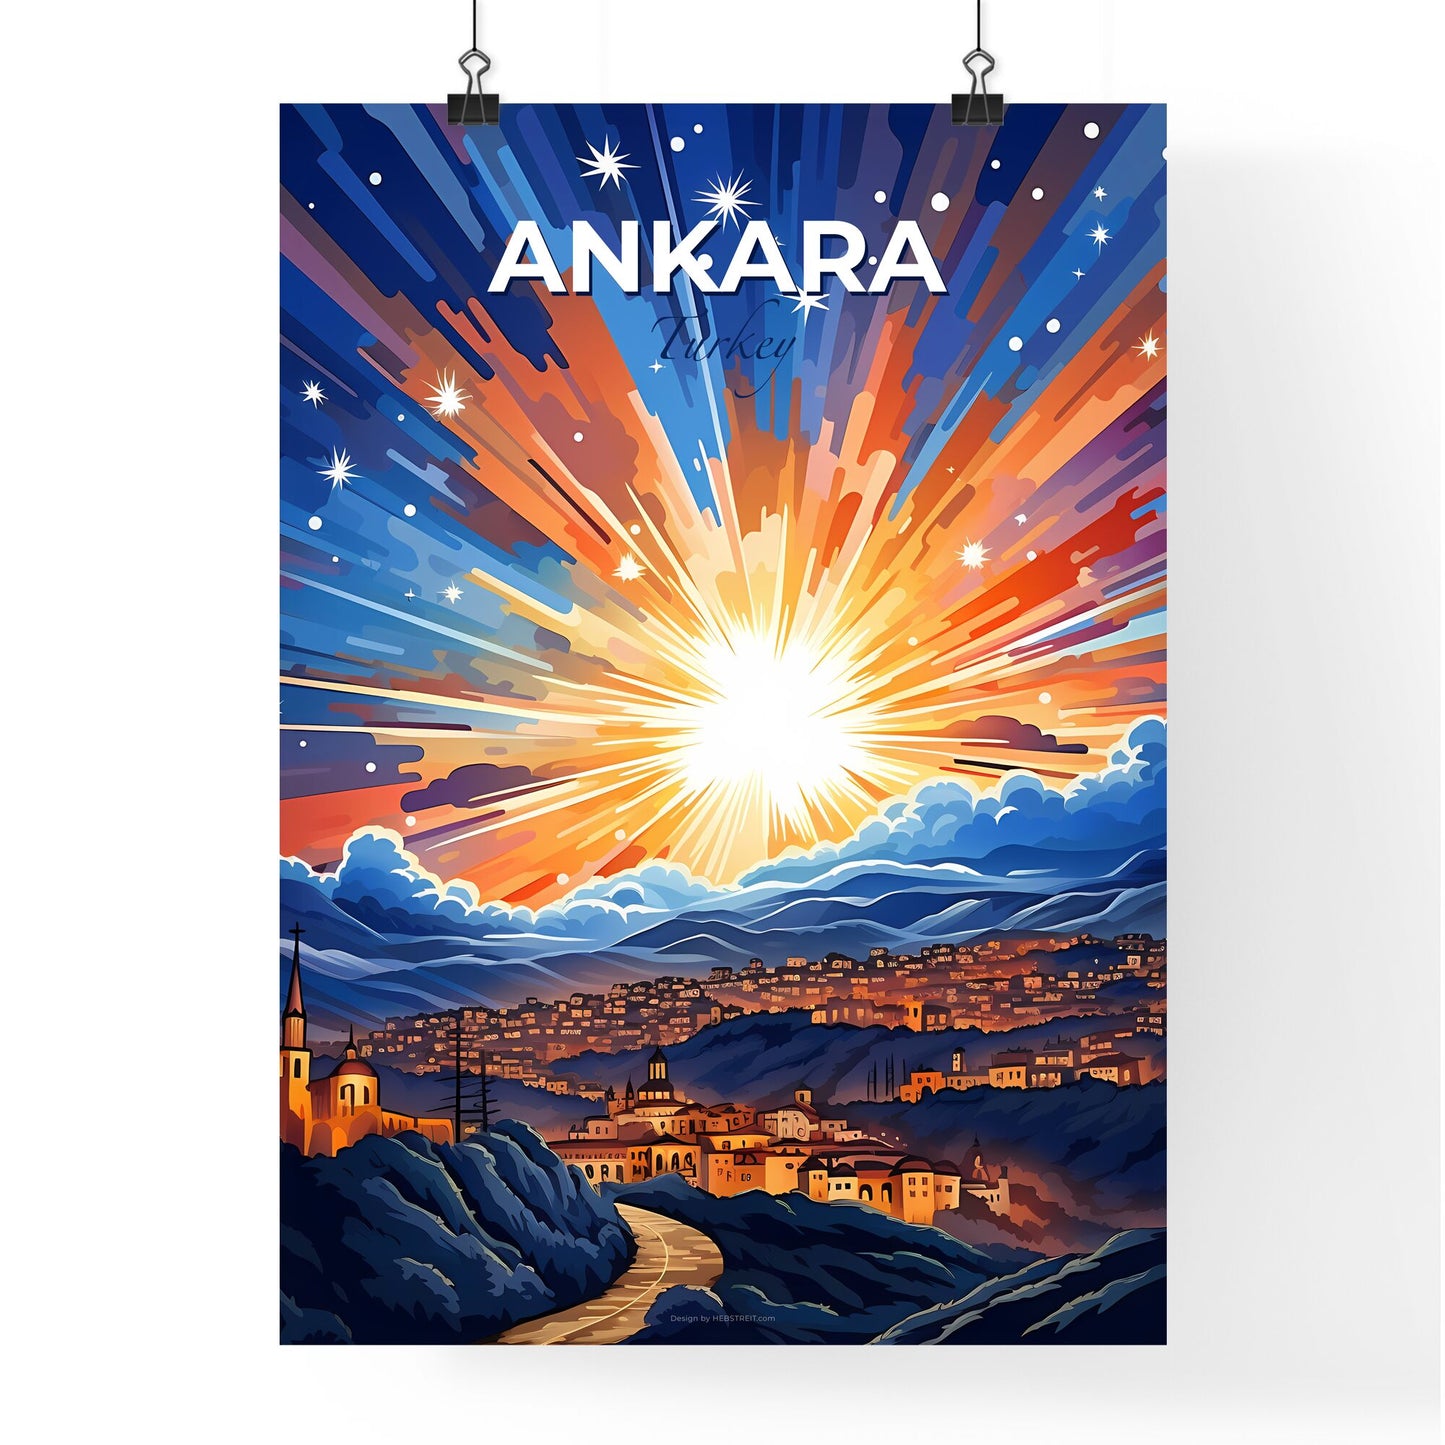 Ankara, Turkey, A Poster of a colorful sky with clouds and buildings Default Title